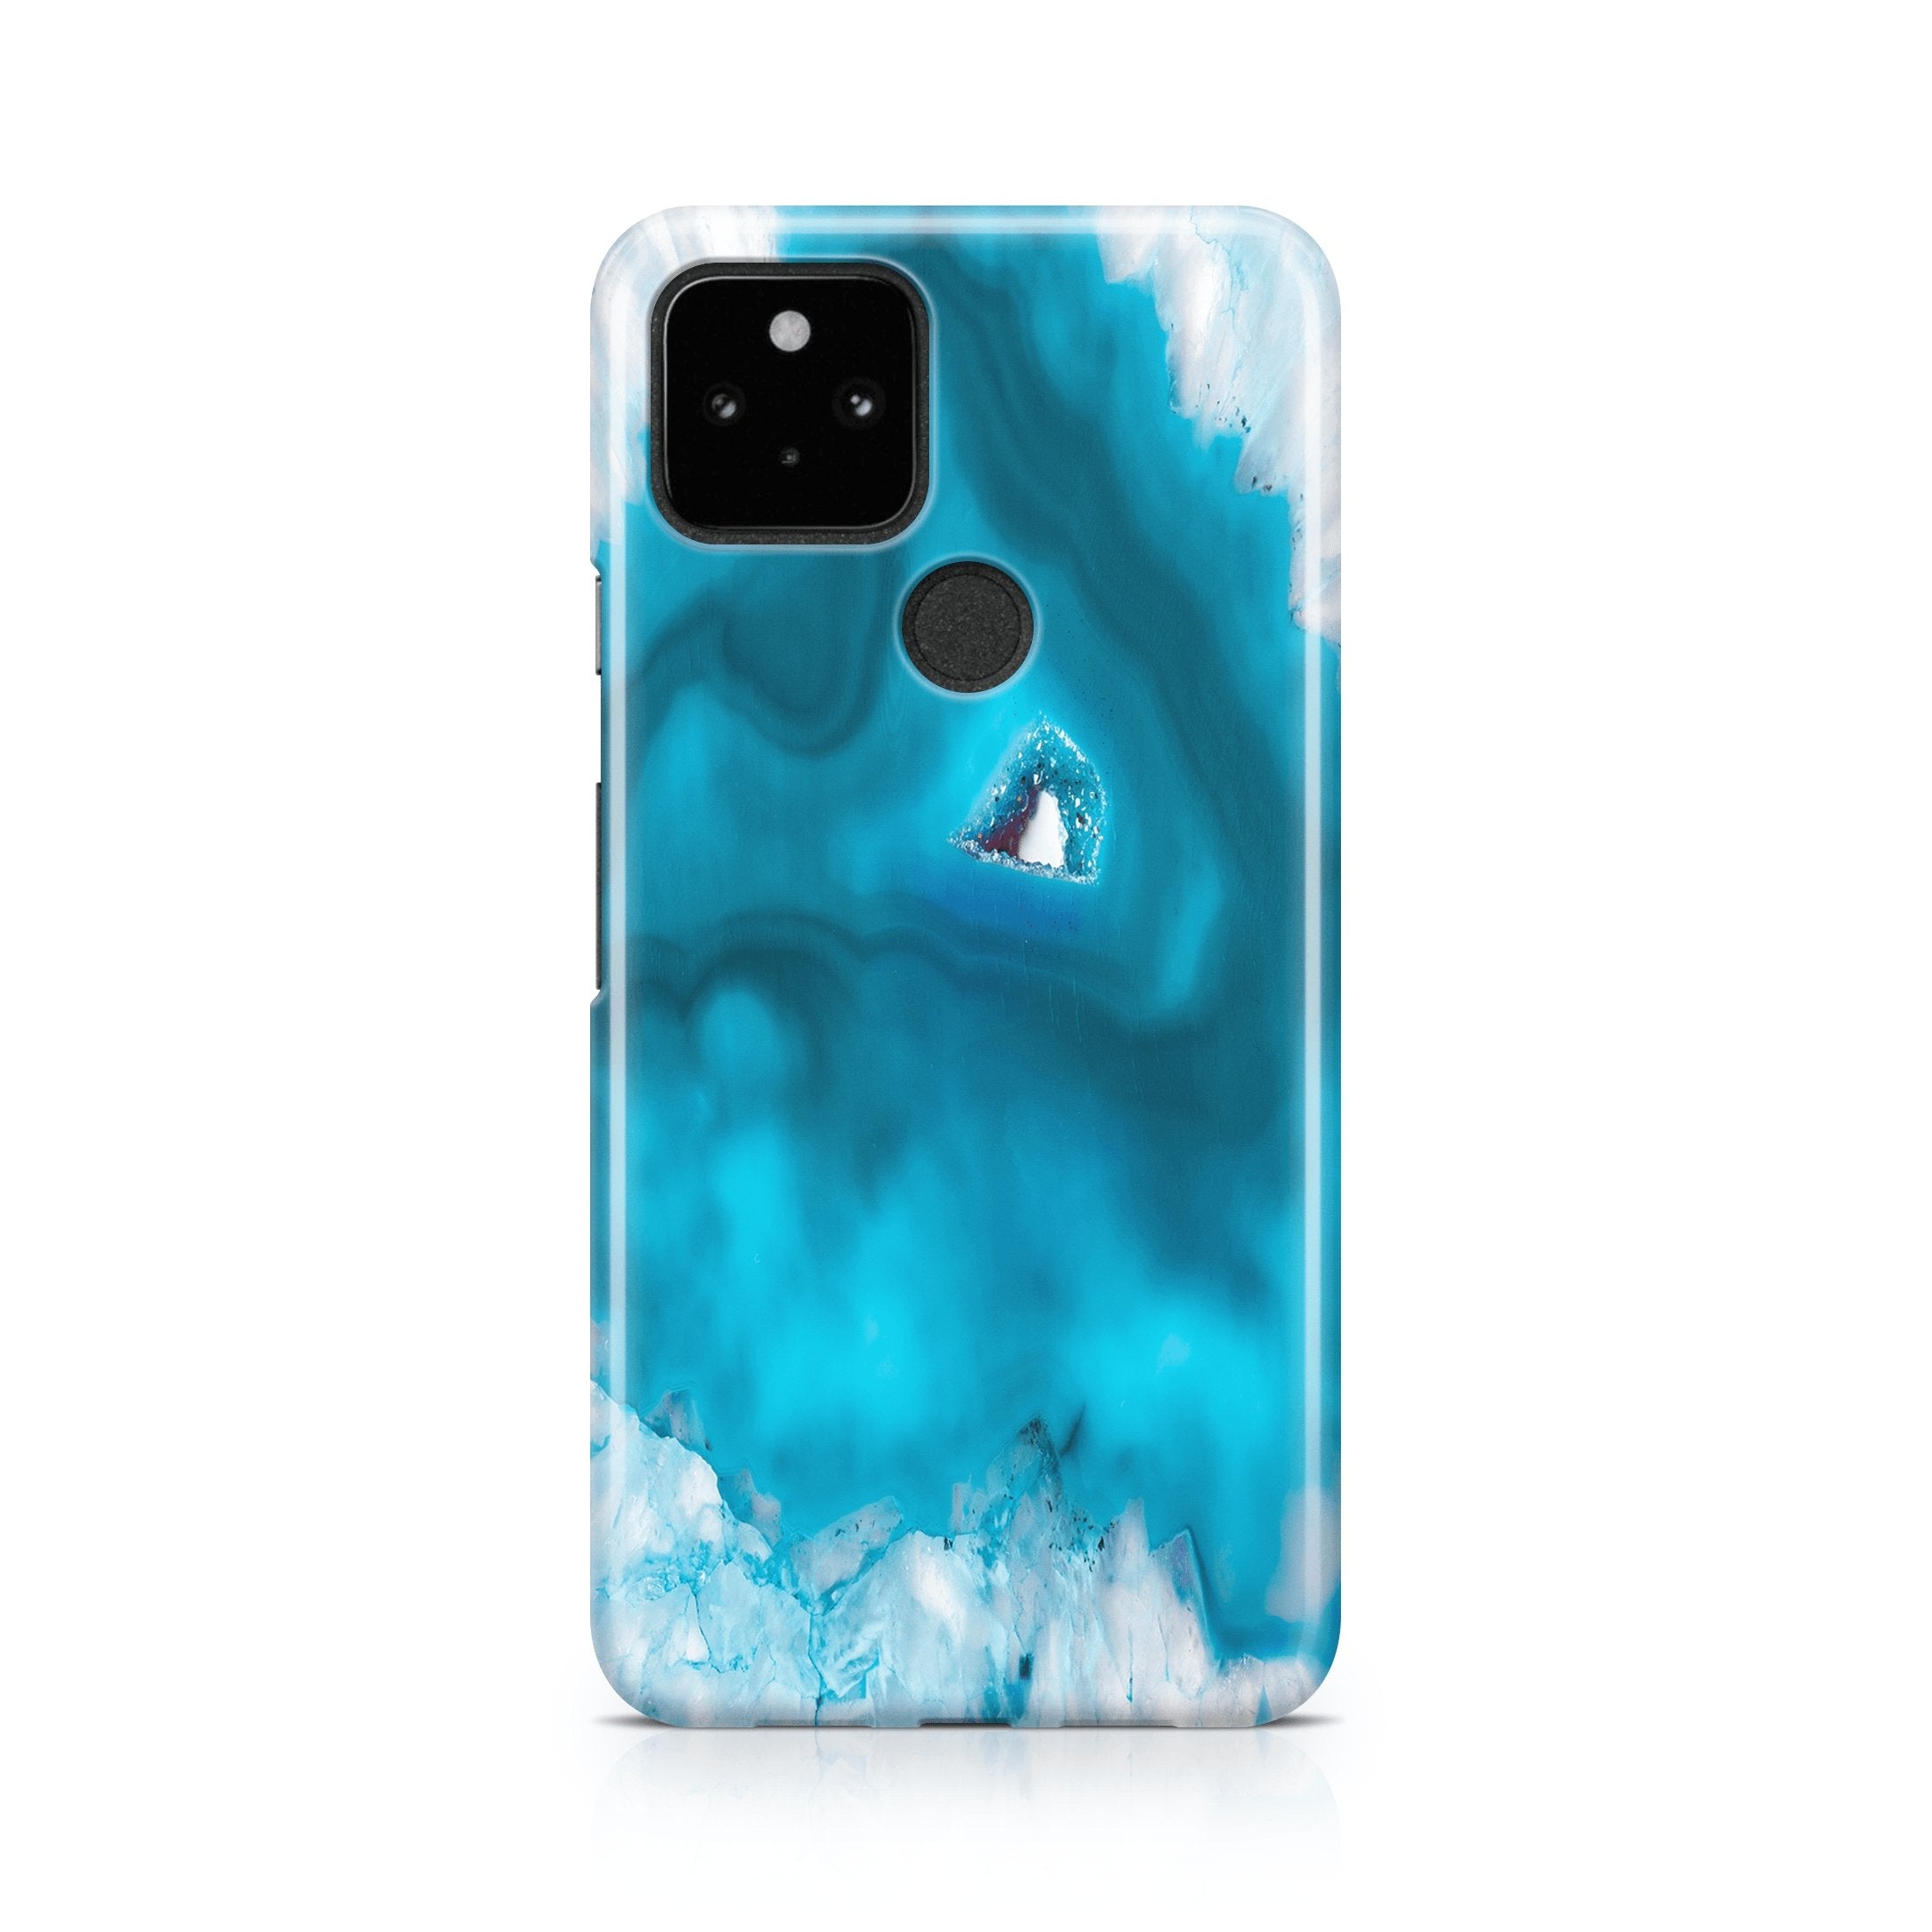 Blue Geode I - Google phone case designs by CaseSwagger